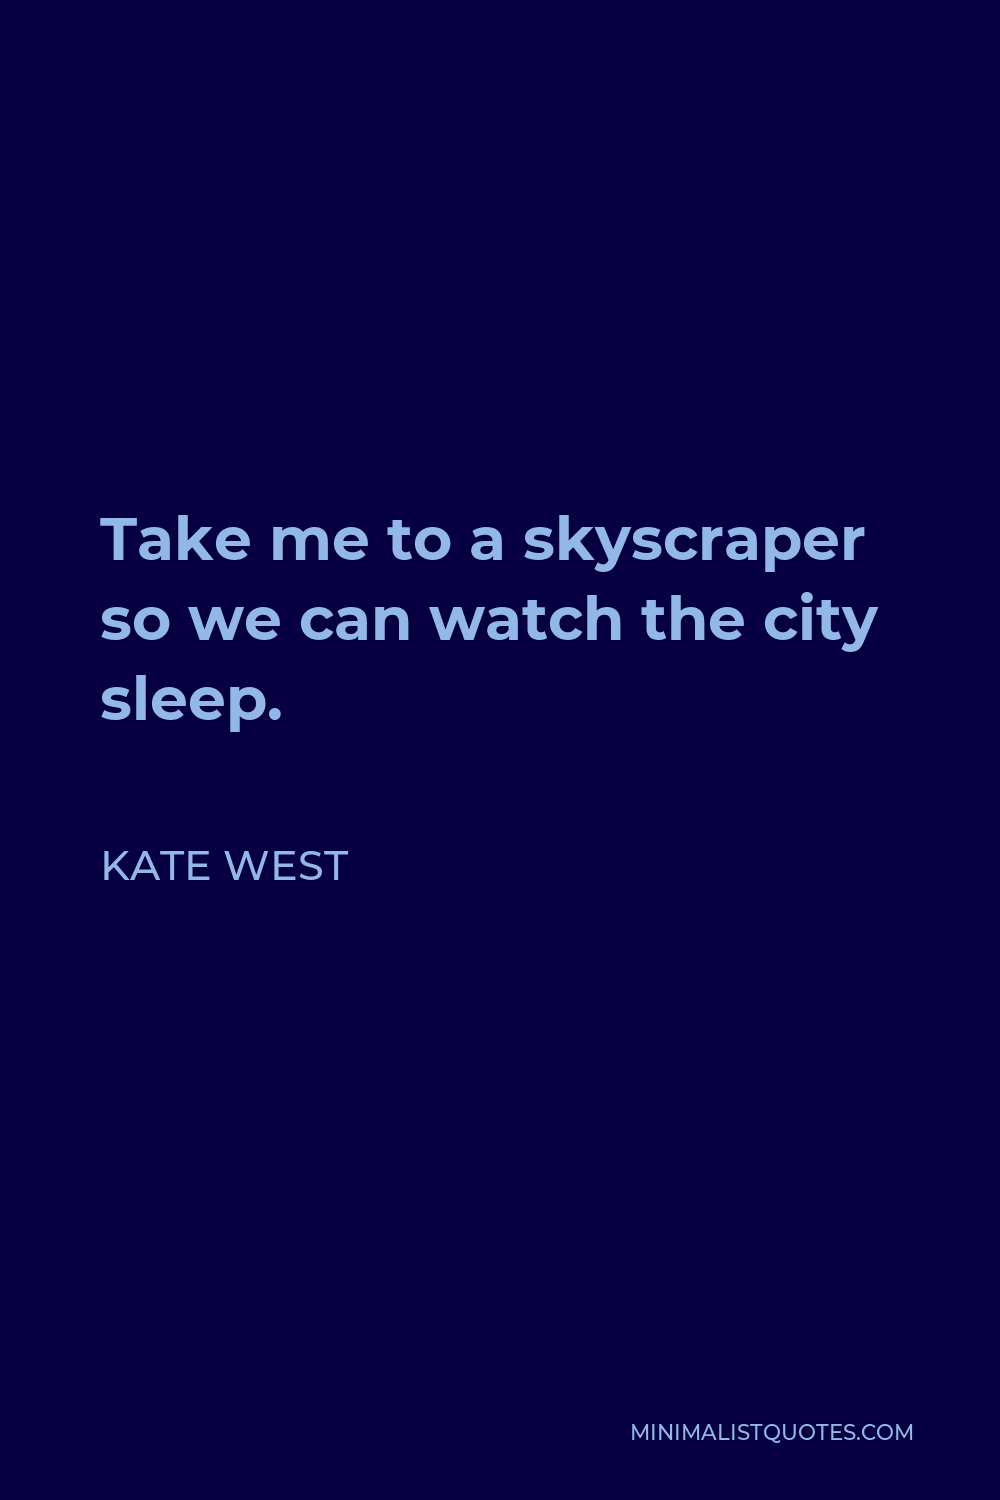 Kate West Quote - Take me to a skyscraper so we can watch the city sleep.